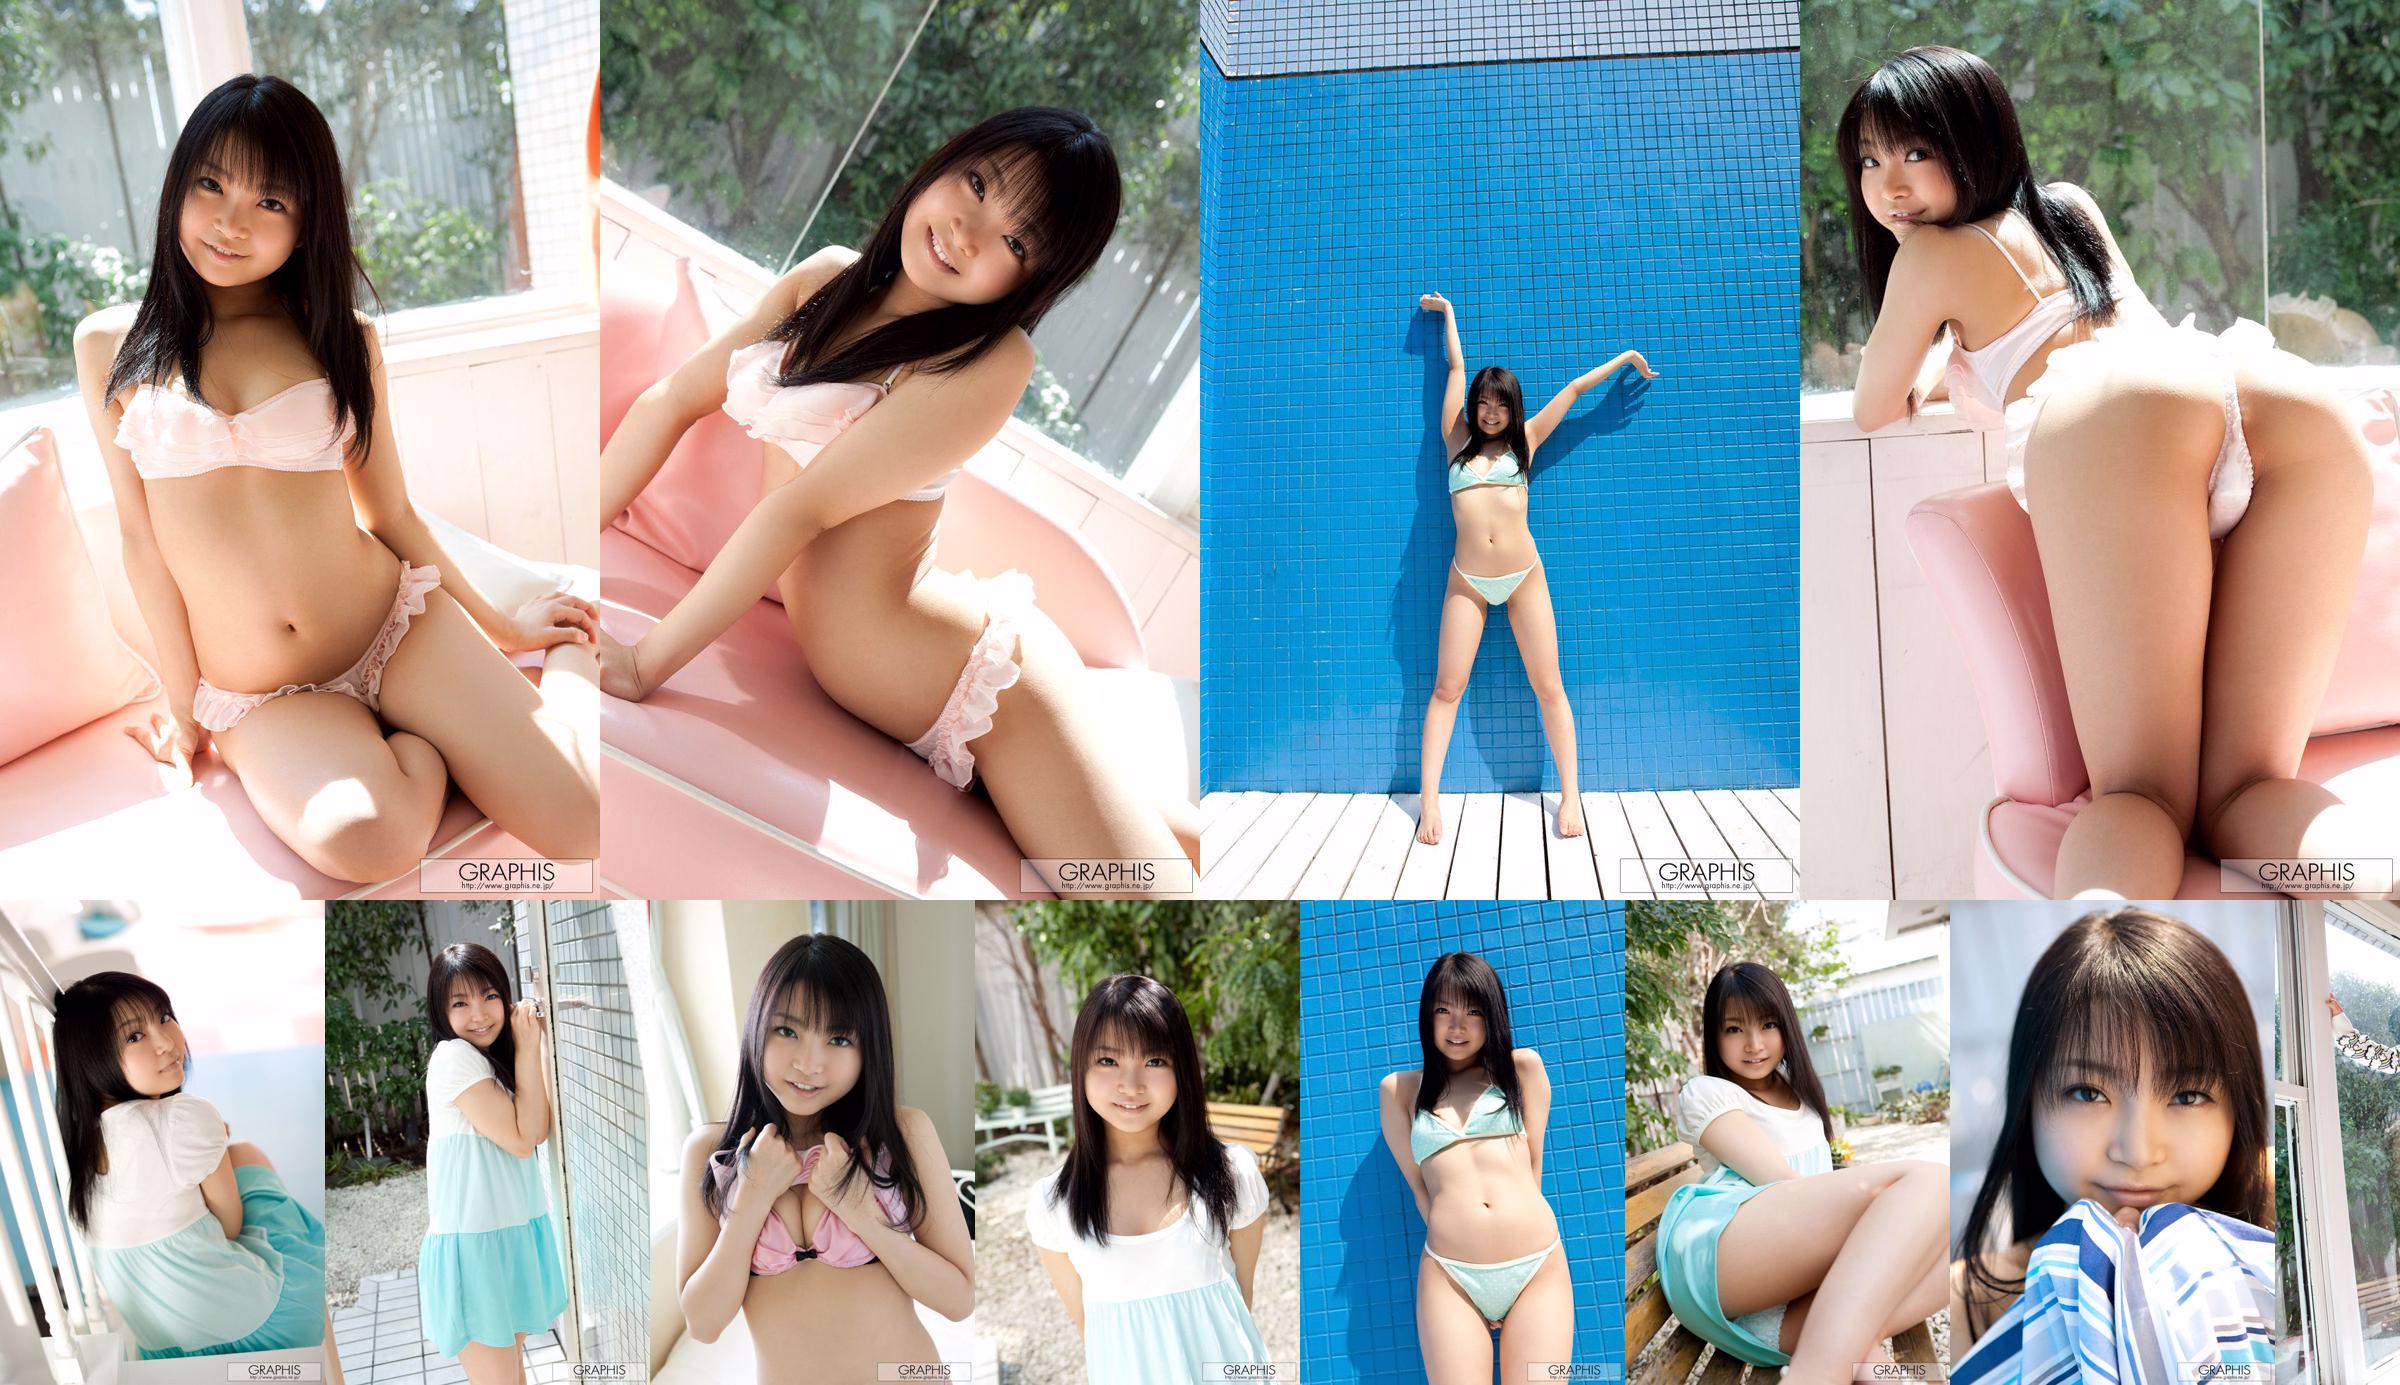 Chihiro Aoi / Chihiro Aoi [Graphis] First Gravure First off dochter No.c0fae7 Pagina 5